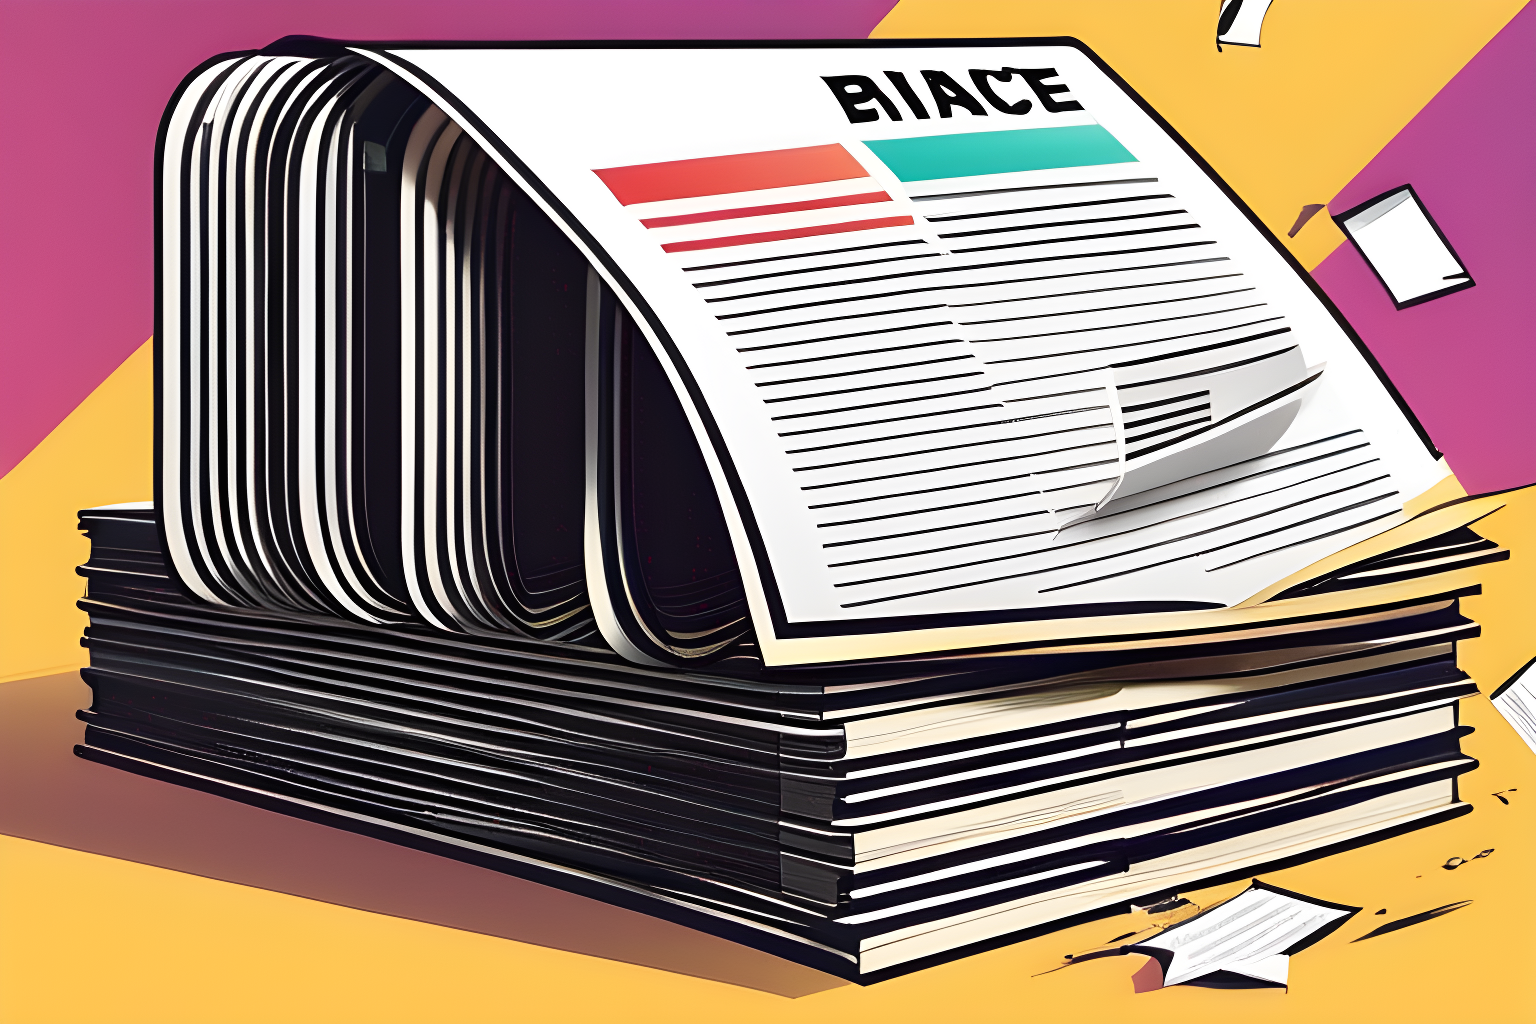 Illustrate a stack of documents being ripped apart by binance